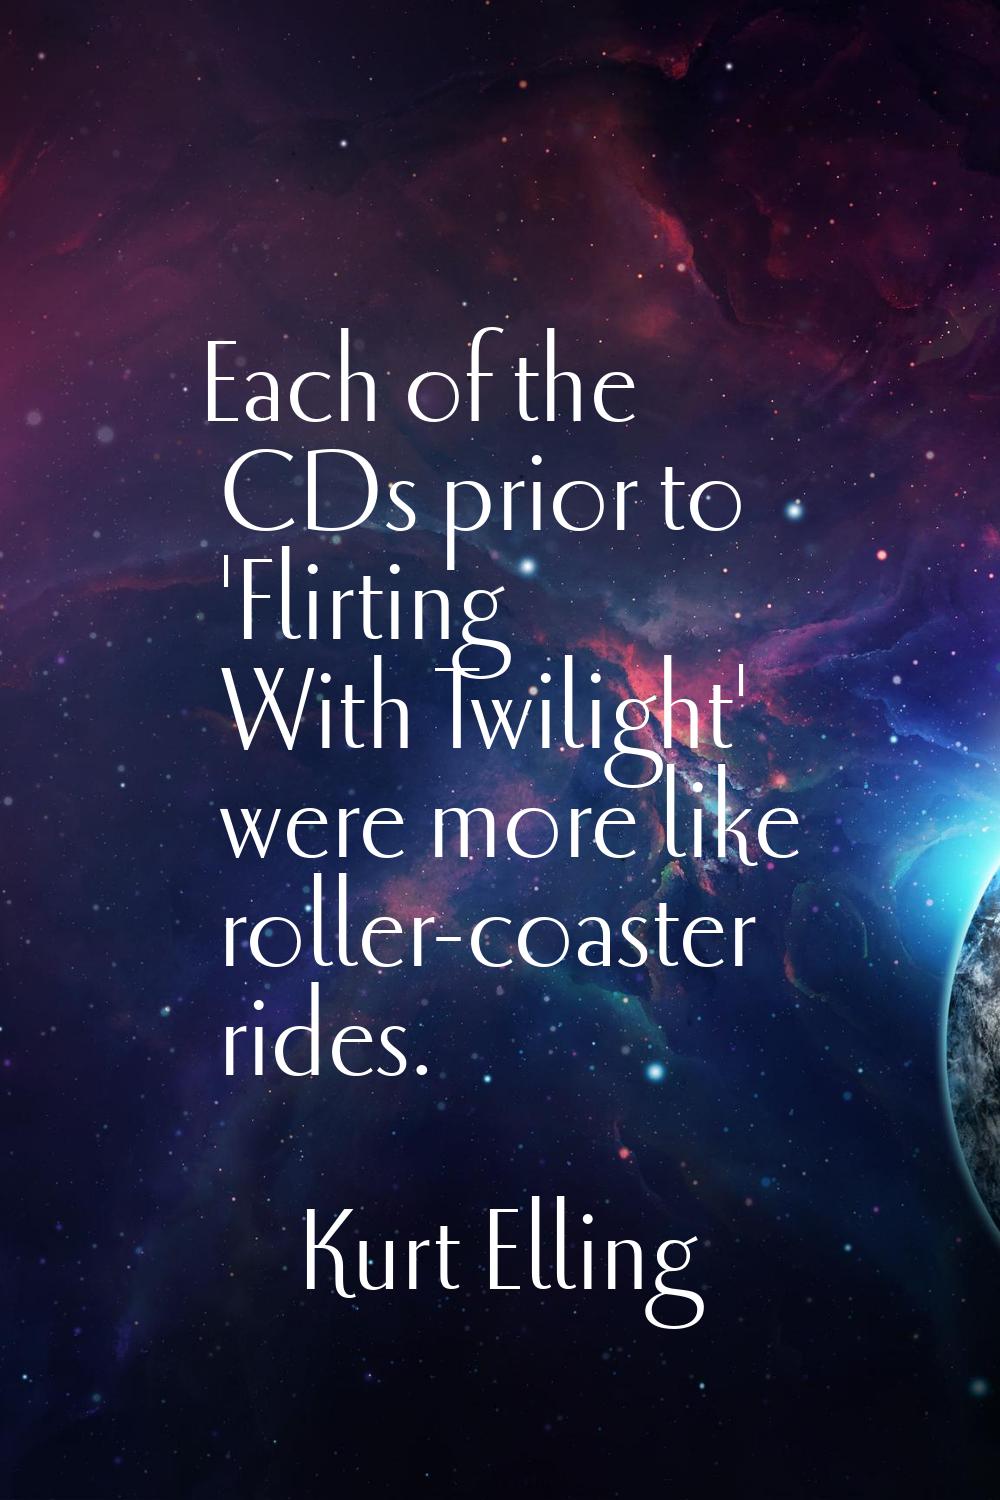 Each of the CDs prior to 'Flirting With Twilight' were more like roller-coaster rides.